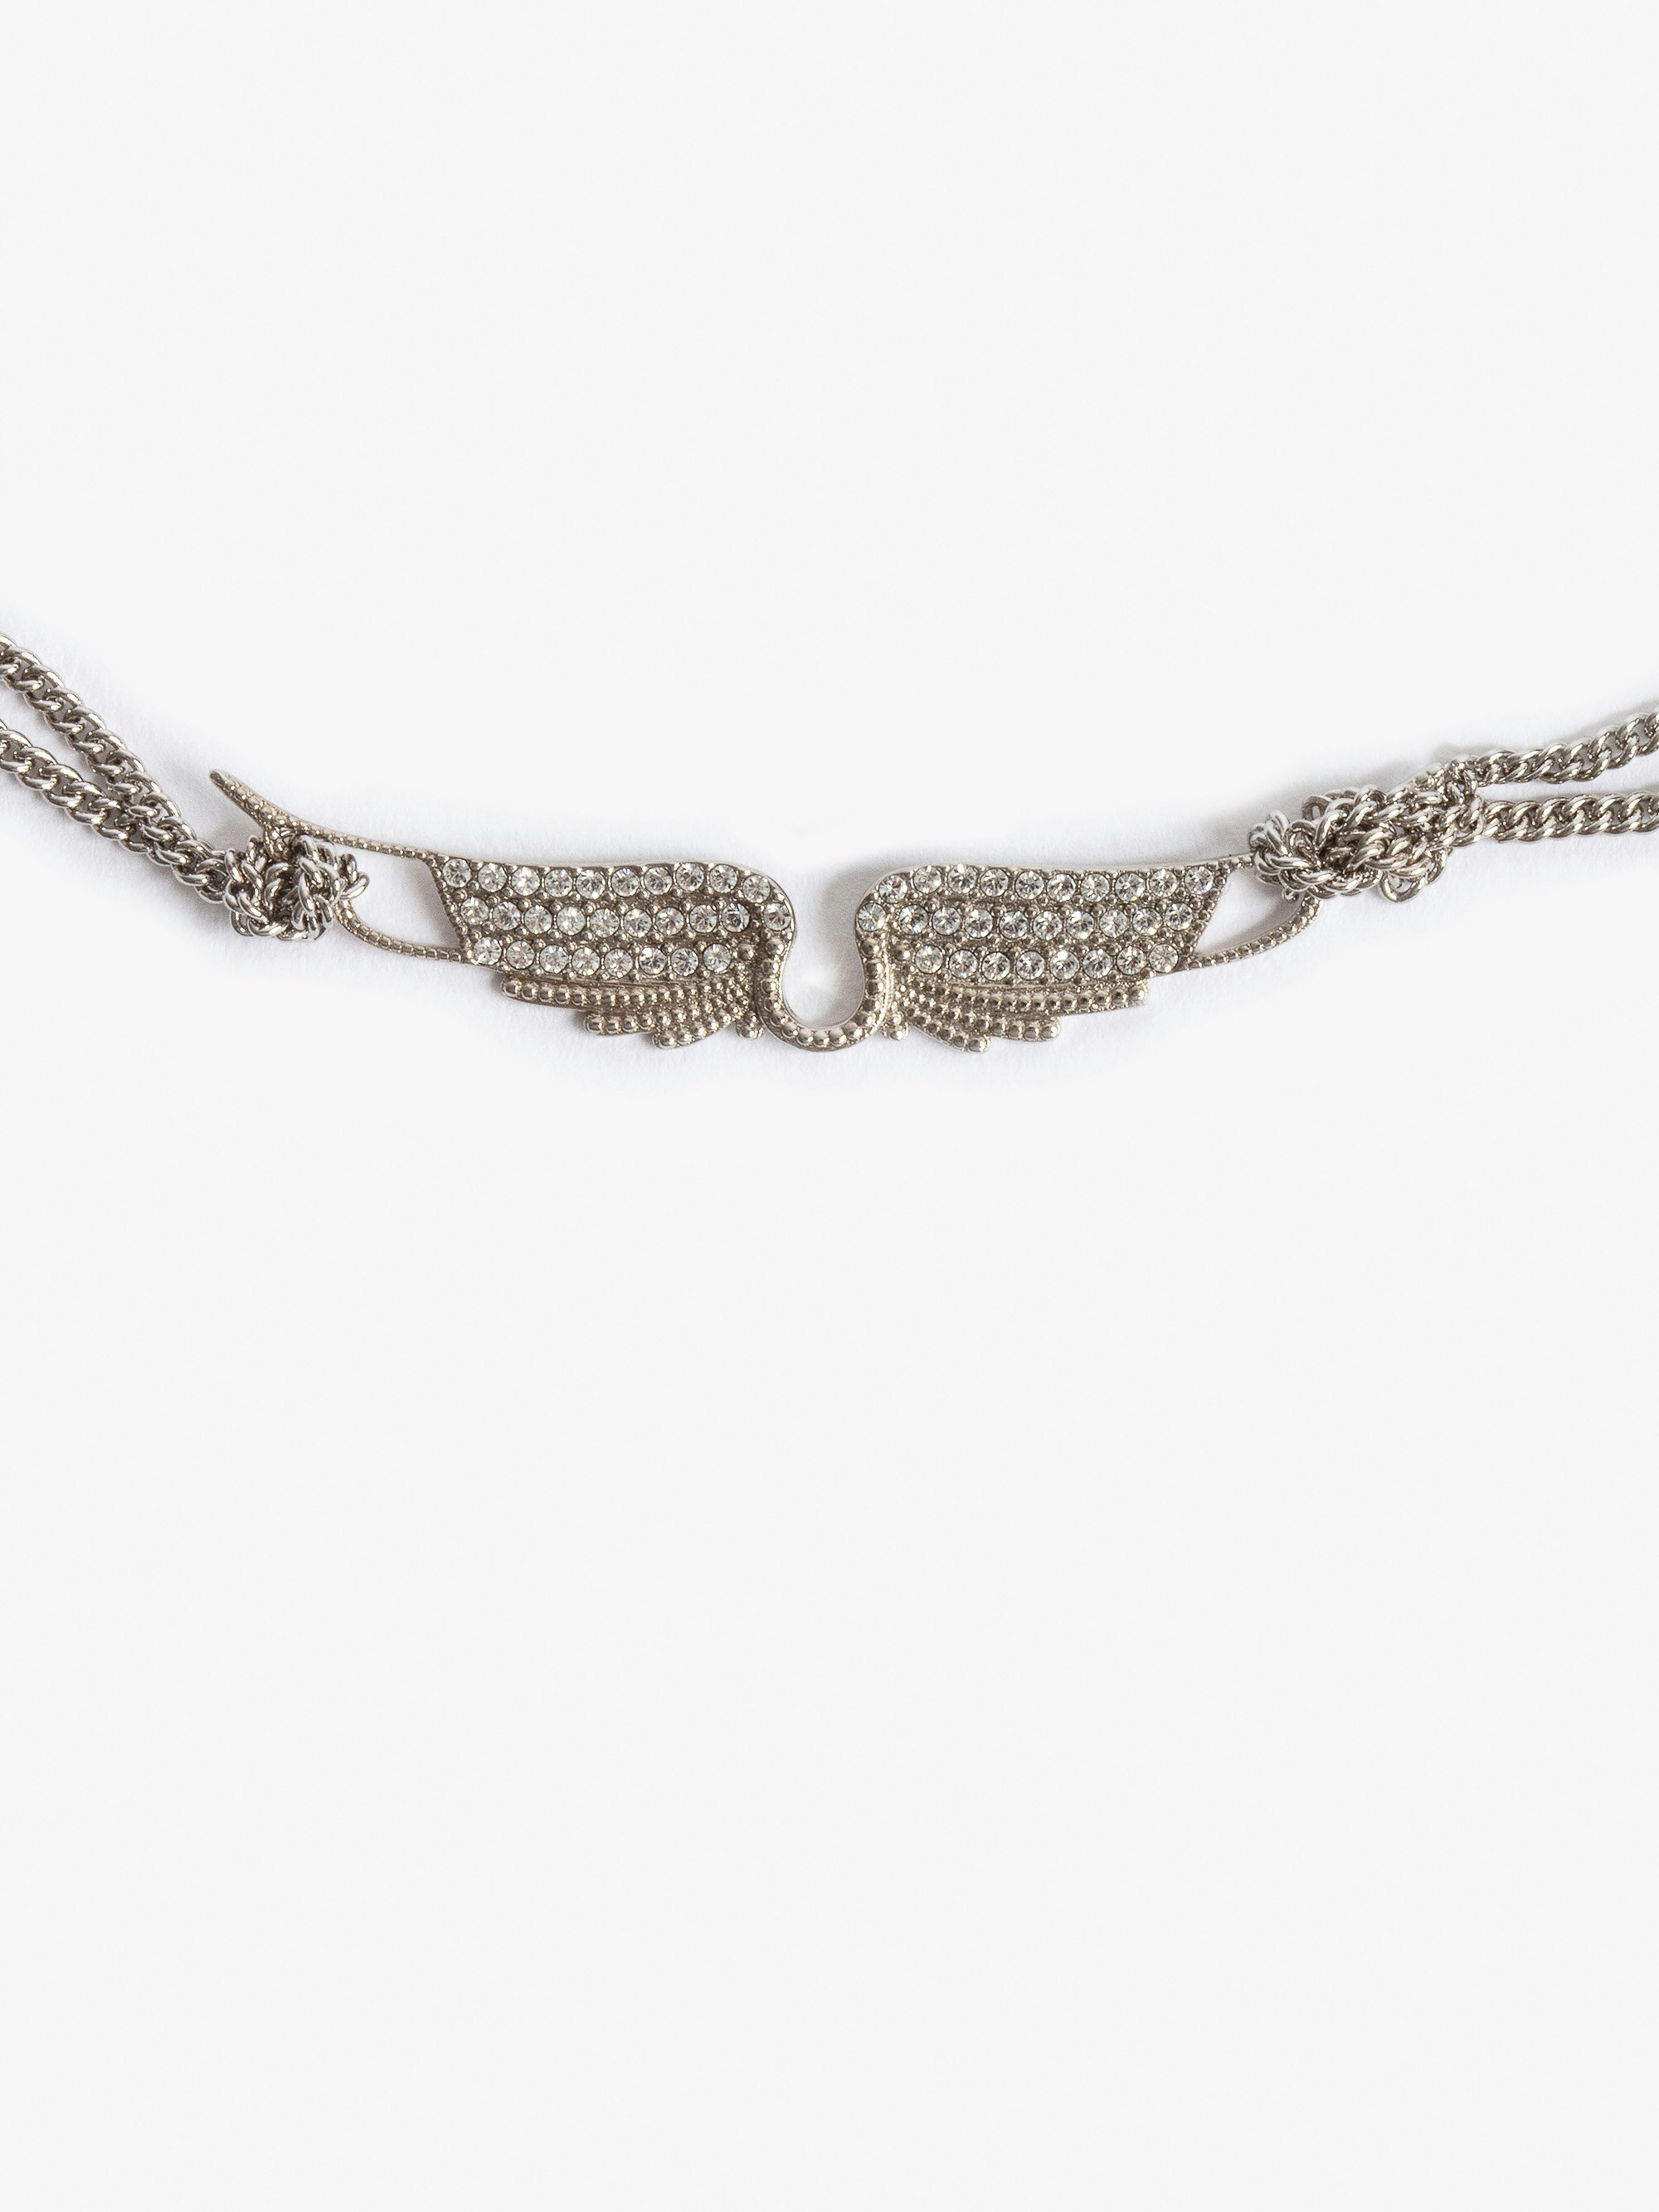 Rock Choker Necklace - Silver-tone brass short necklace with crystal-embellished wings pendant.